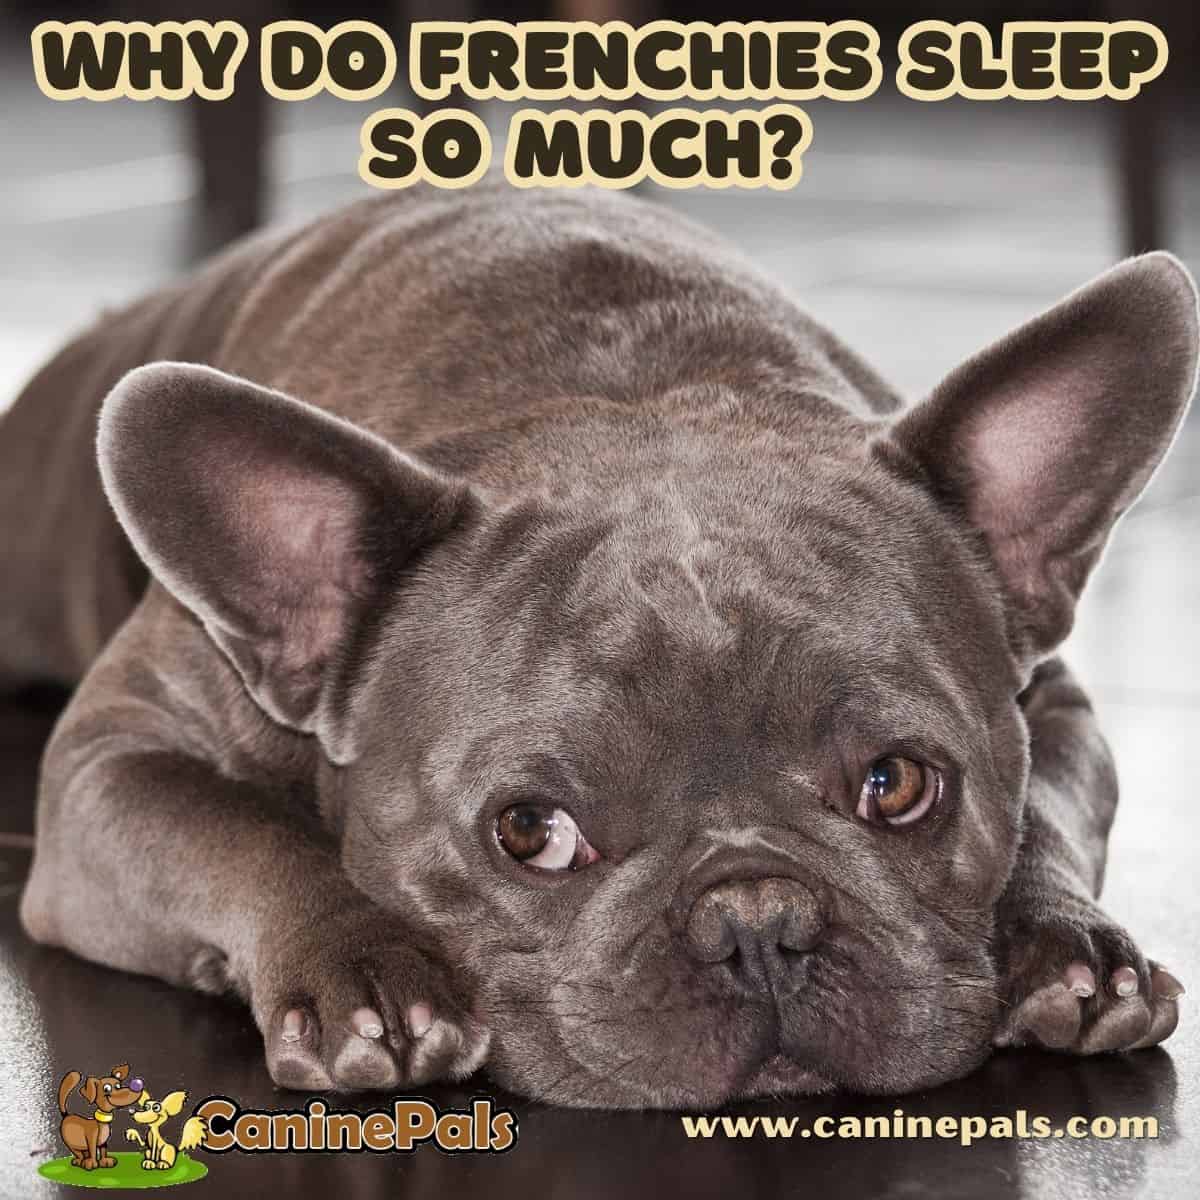 Why Do Frenchies Sleep So Much?